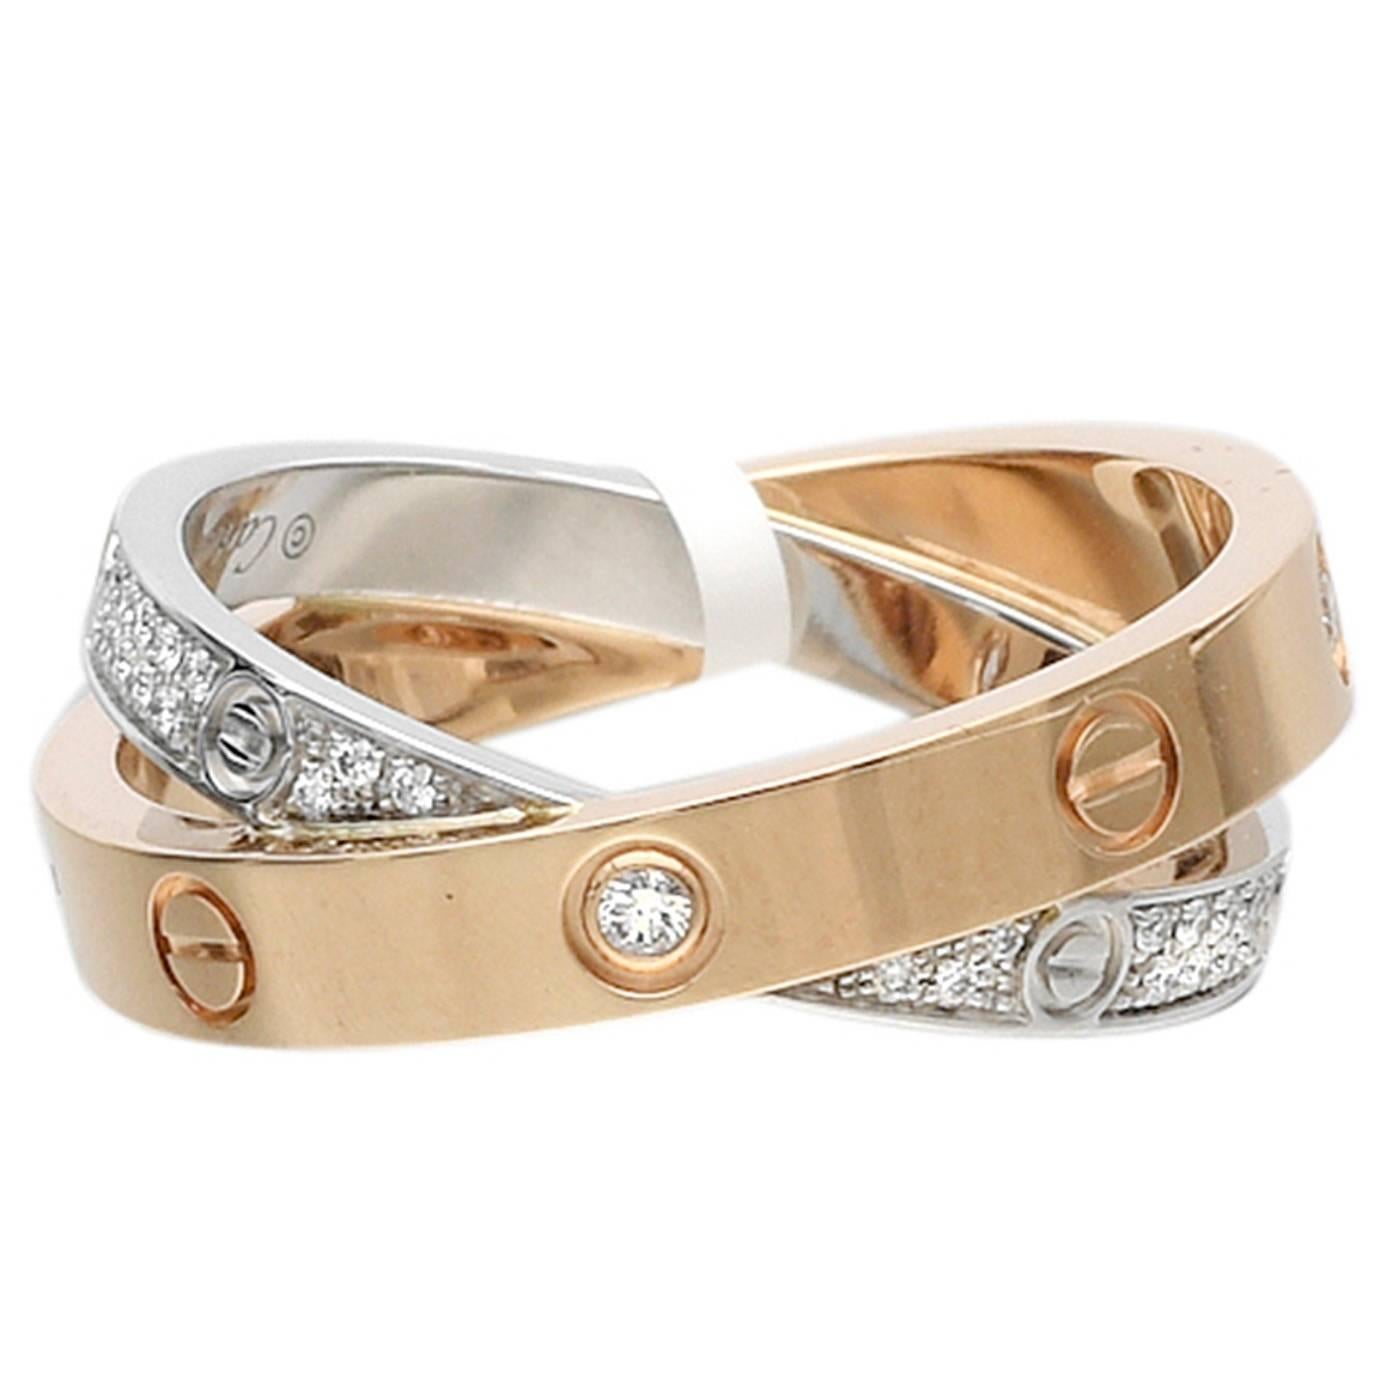 Cartier LOVE Diamond Gold Double Band Ring